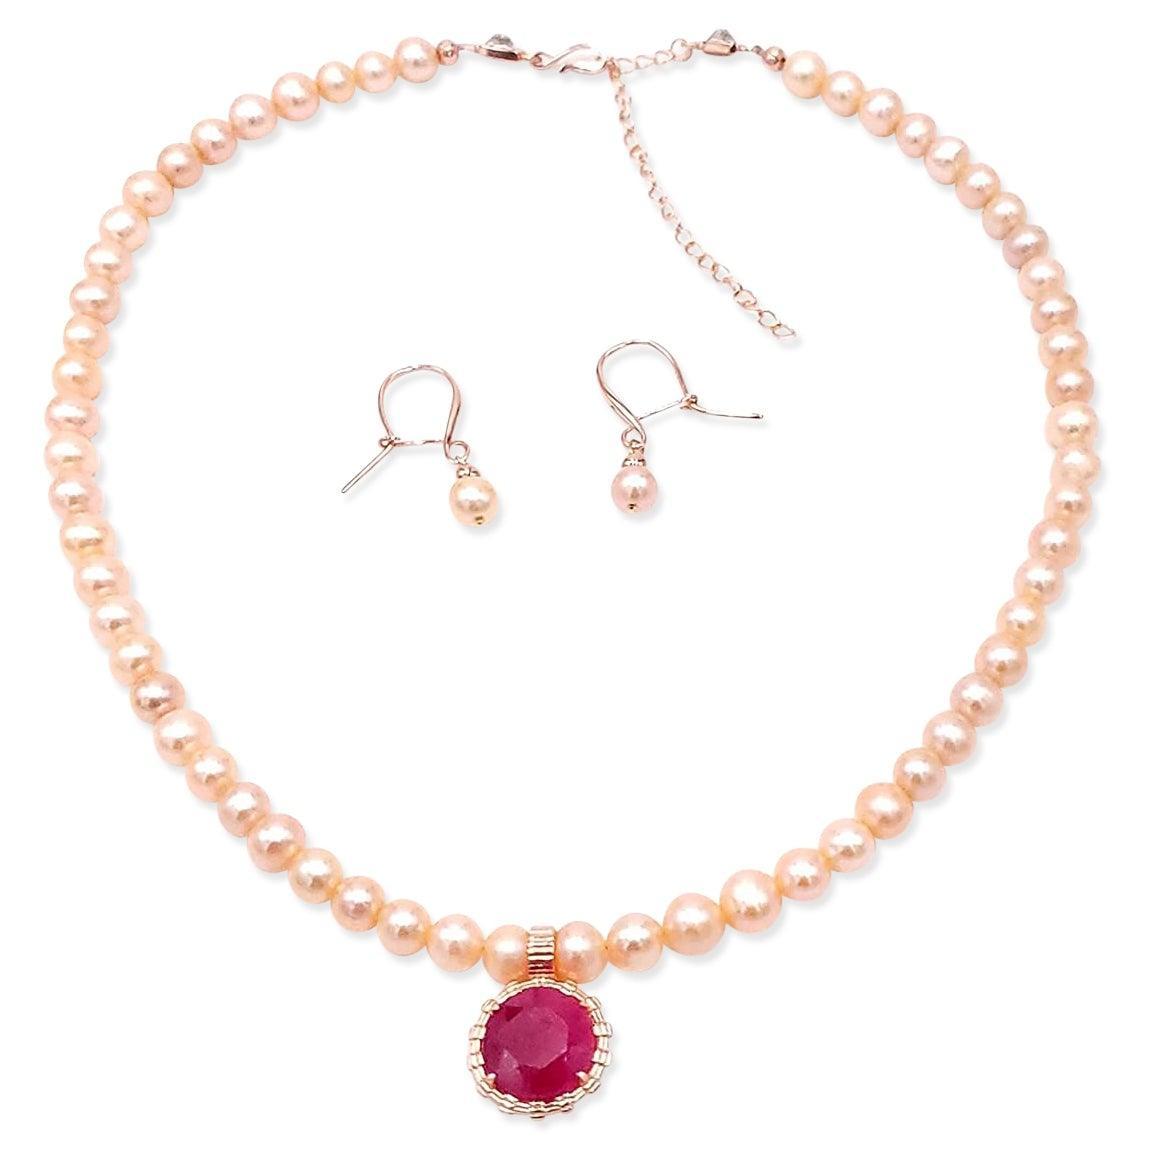 Natural Ruby and Pearl Jewelry Set